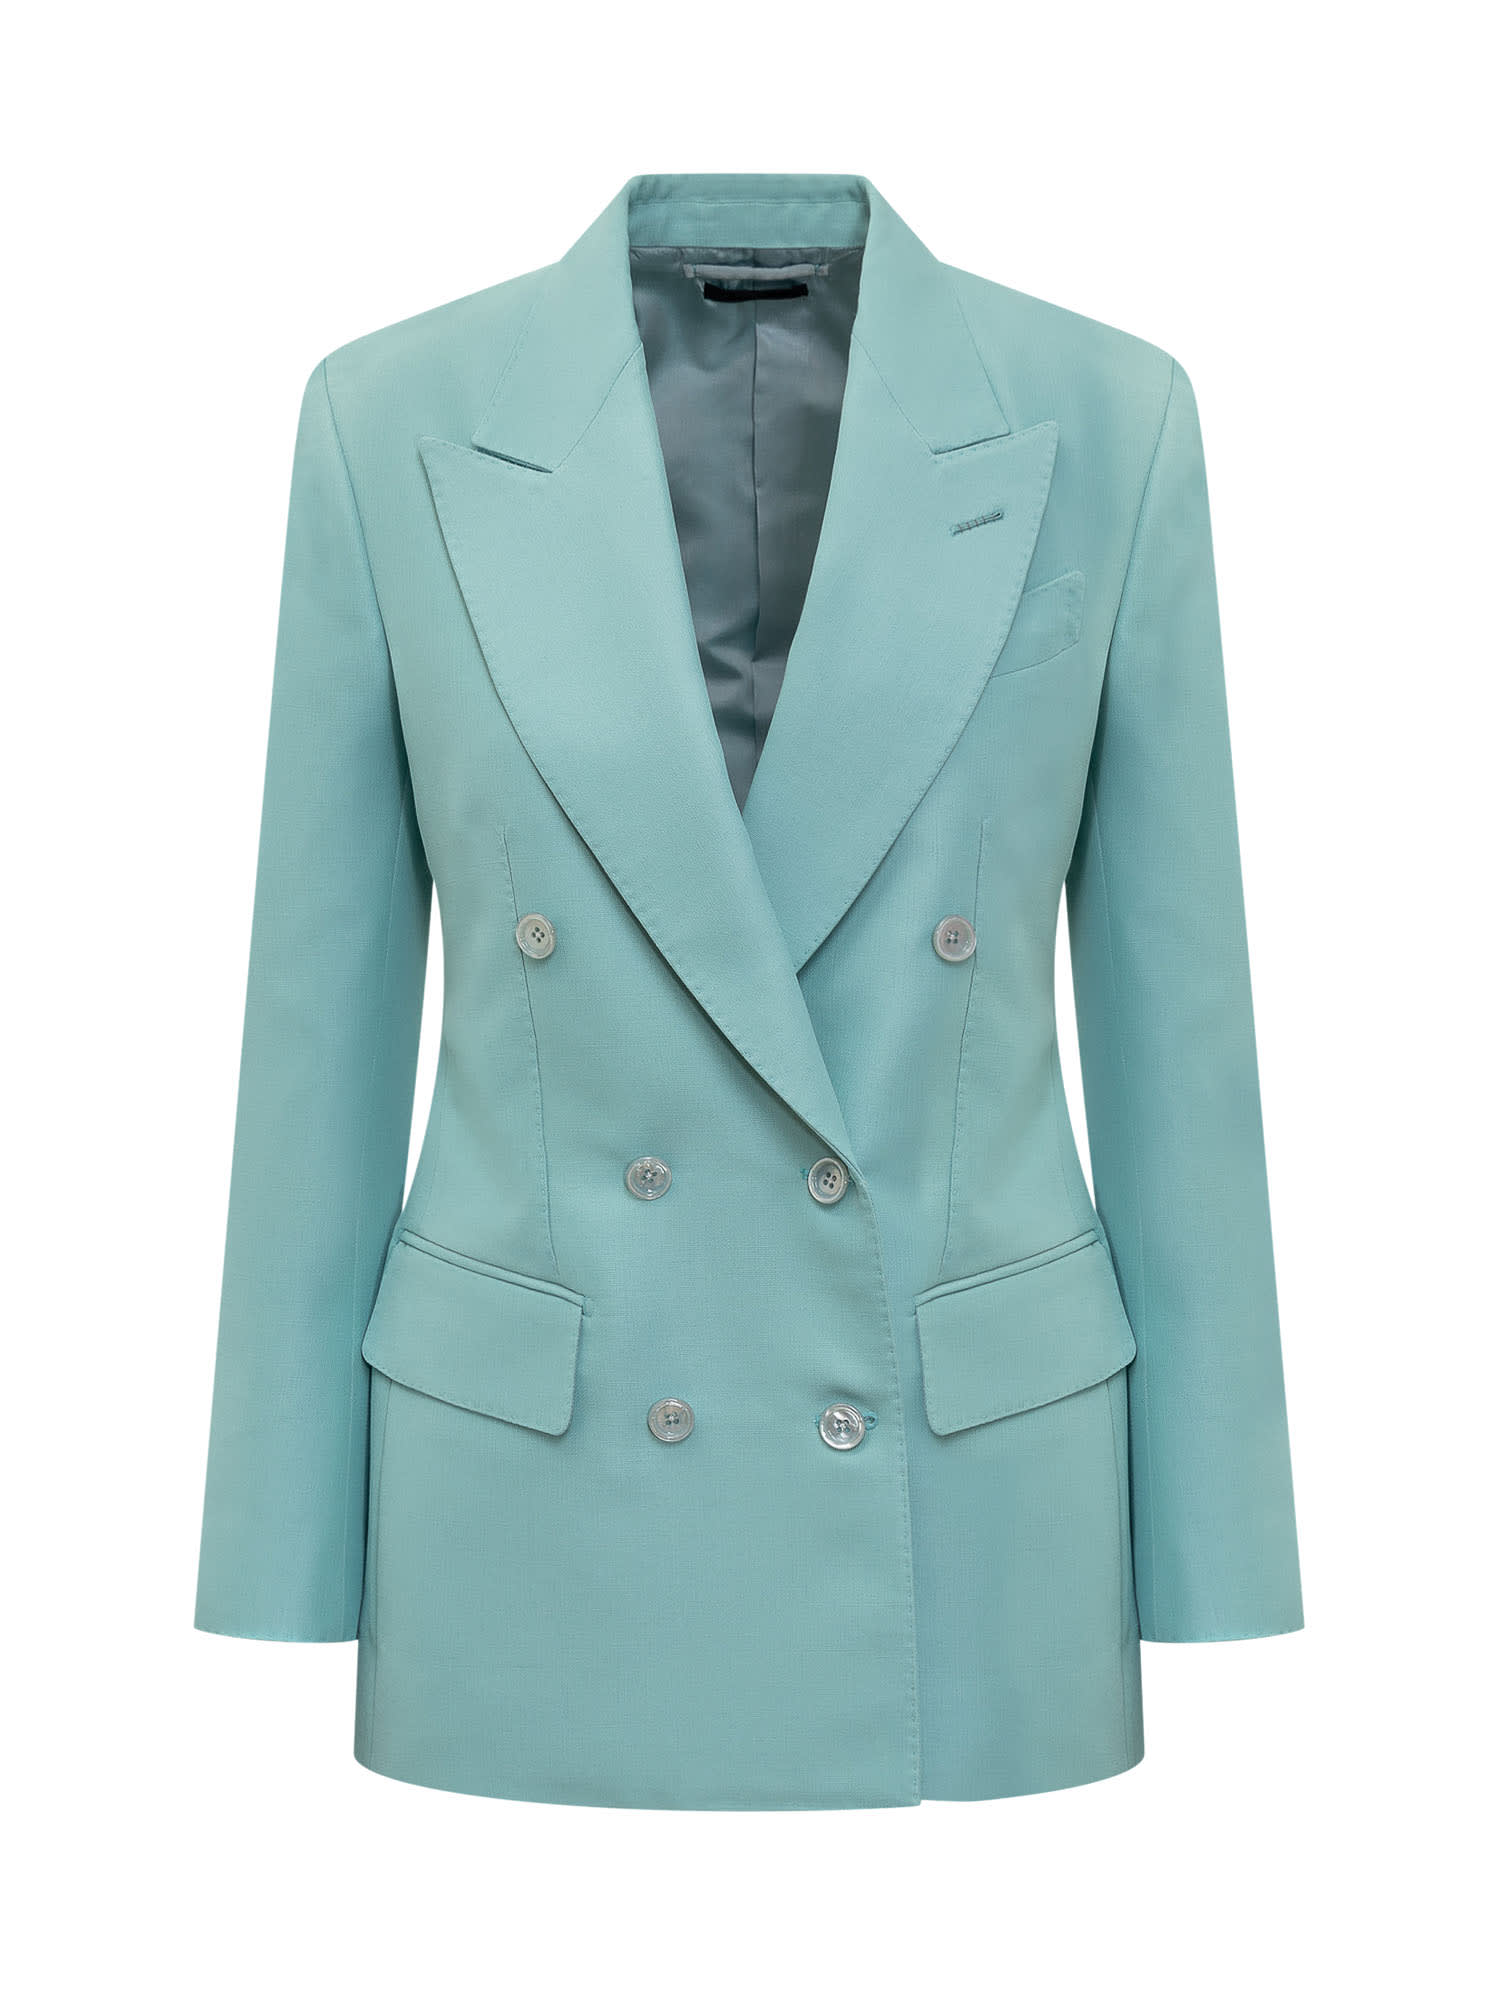 Tom Ford Virign Wool And Viscose Blend Jacket In Light Turquoise